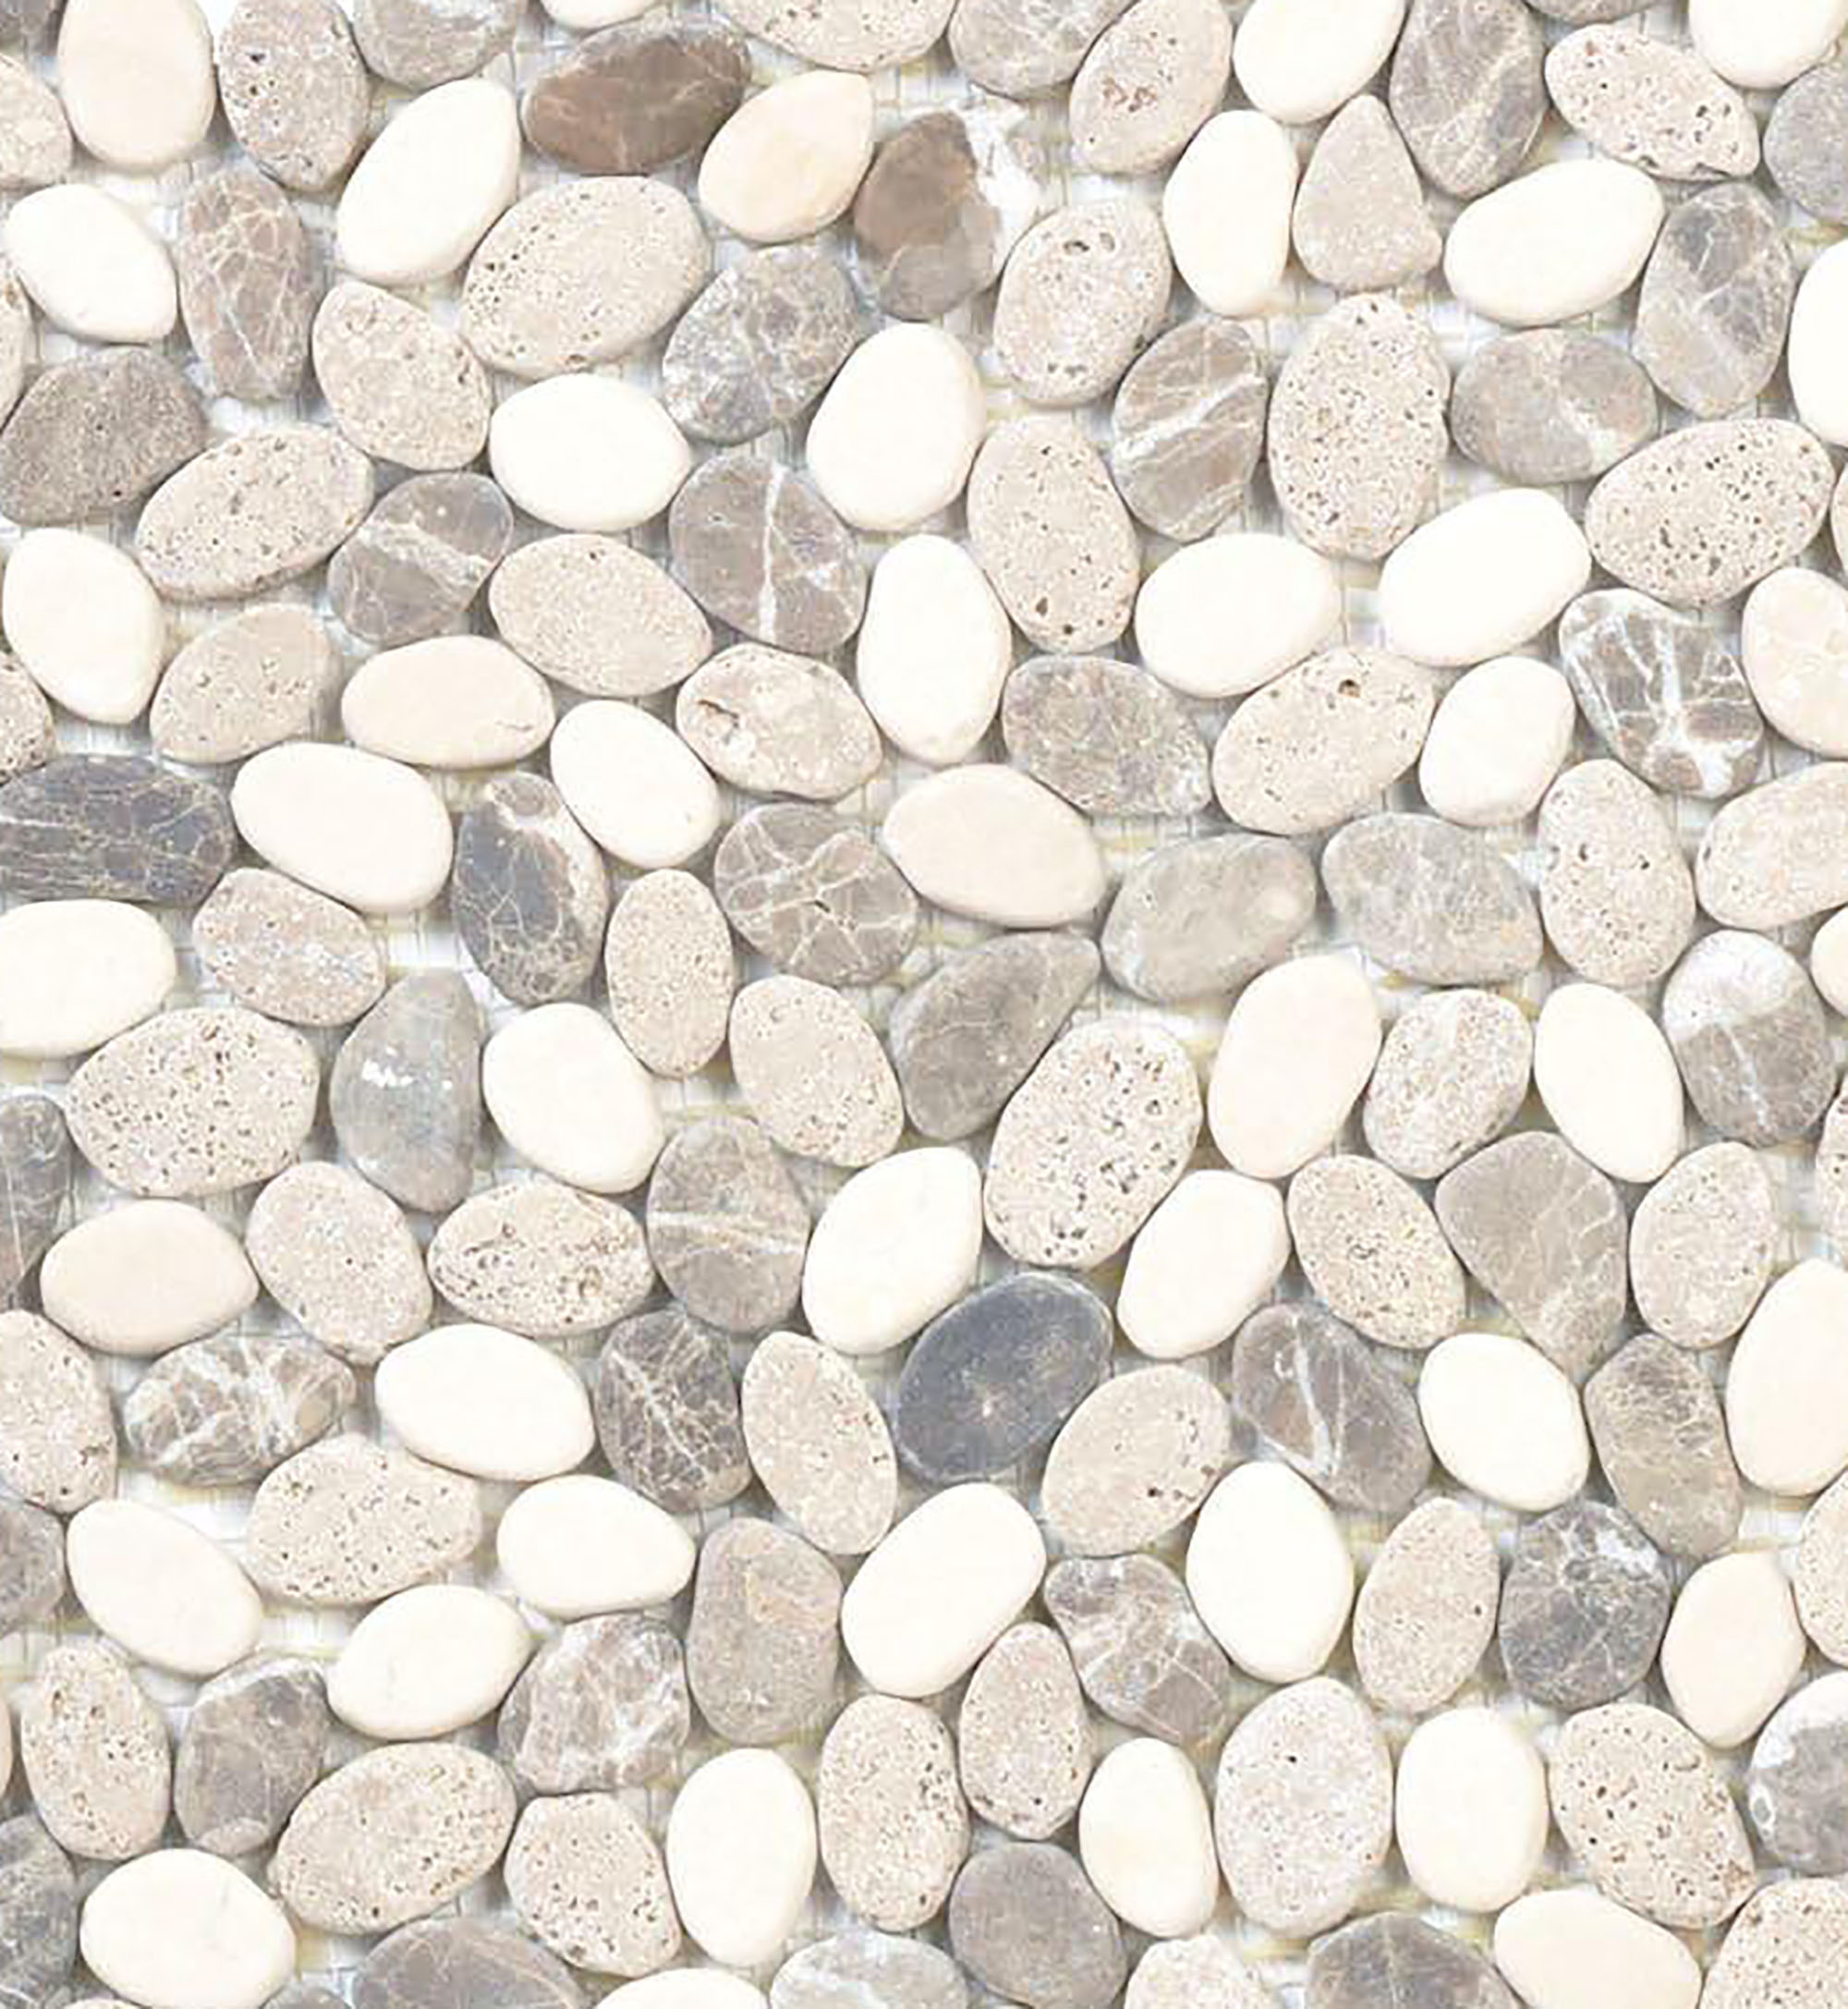 Pebble Shower Floors Just Say No, How To Do A Pebble Shower Floor